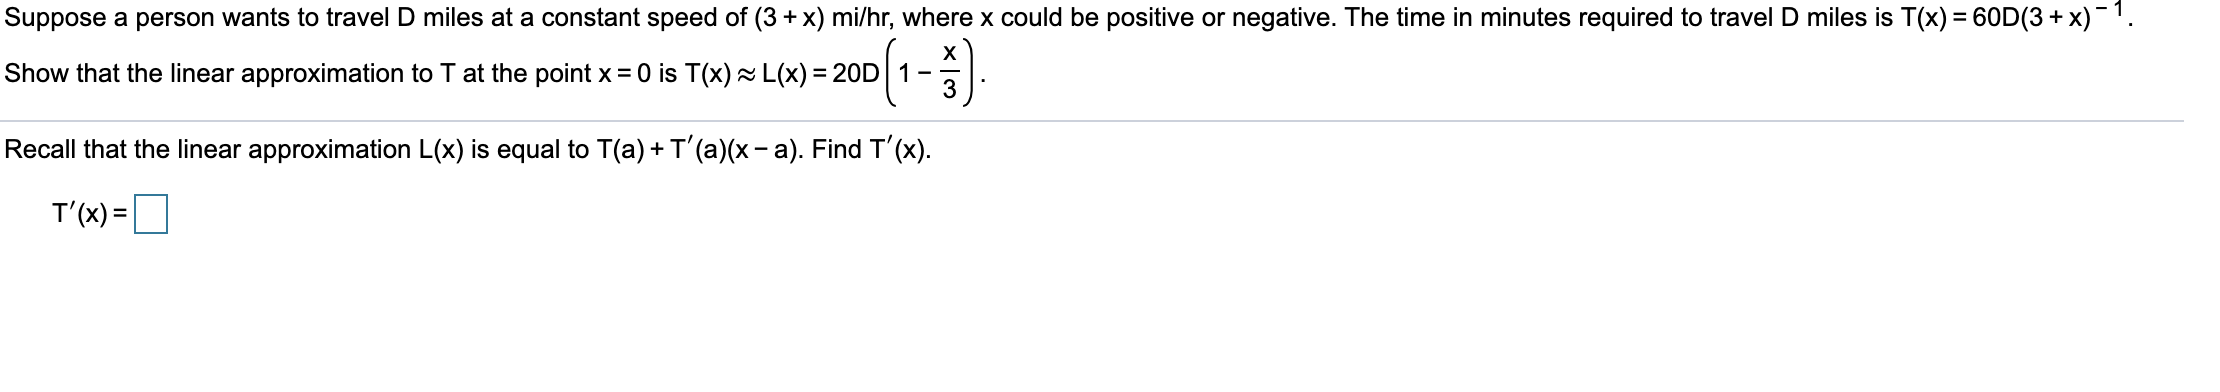 Suppose a person wants to travel D miles at a constant speed of (3 + x) mi/hr, where x could be positive or negative. The time in minutes required to travel D miles is T(x) = 60D(3 + x)-1.
Show that the linear approximation to T at the point x = 0 is T(x) L(x) = 20D 1
3
Recall that the linear approximation L(x) is equal to T(a) + T'(a)(x- a). Find T'(x).
T'(x) =
